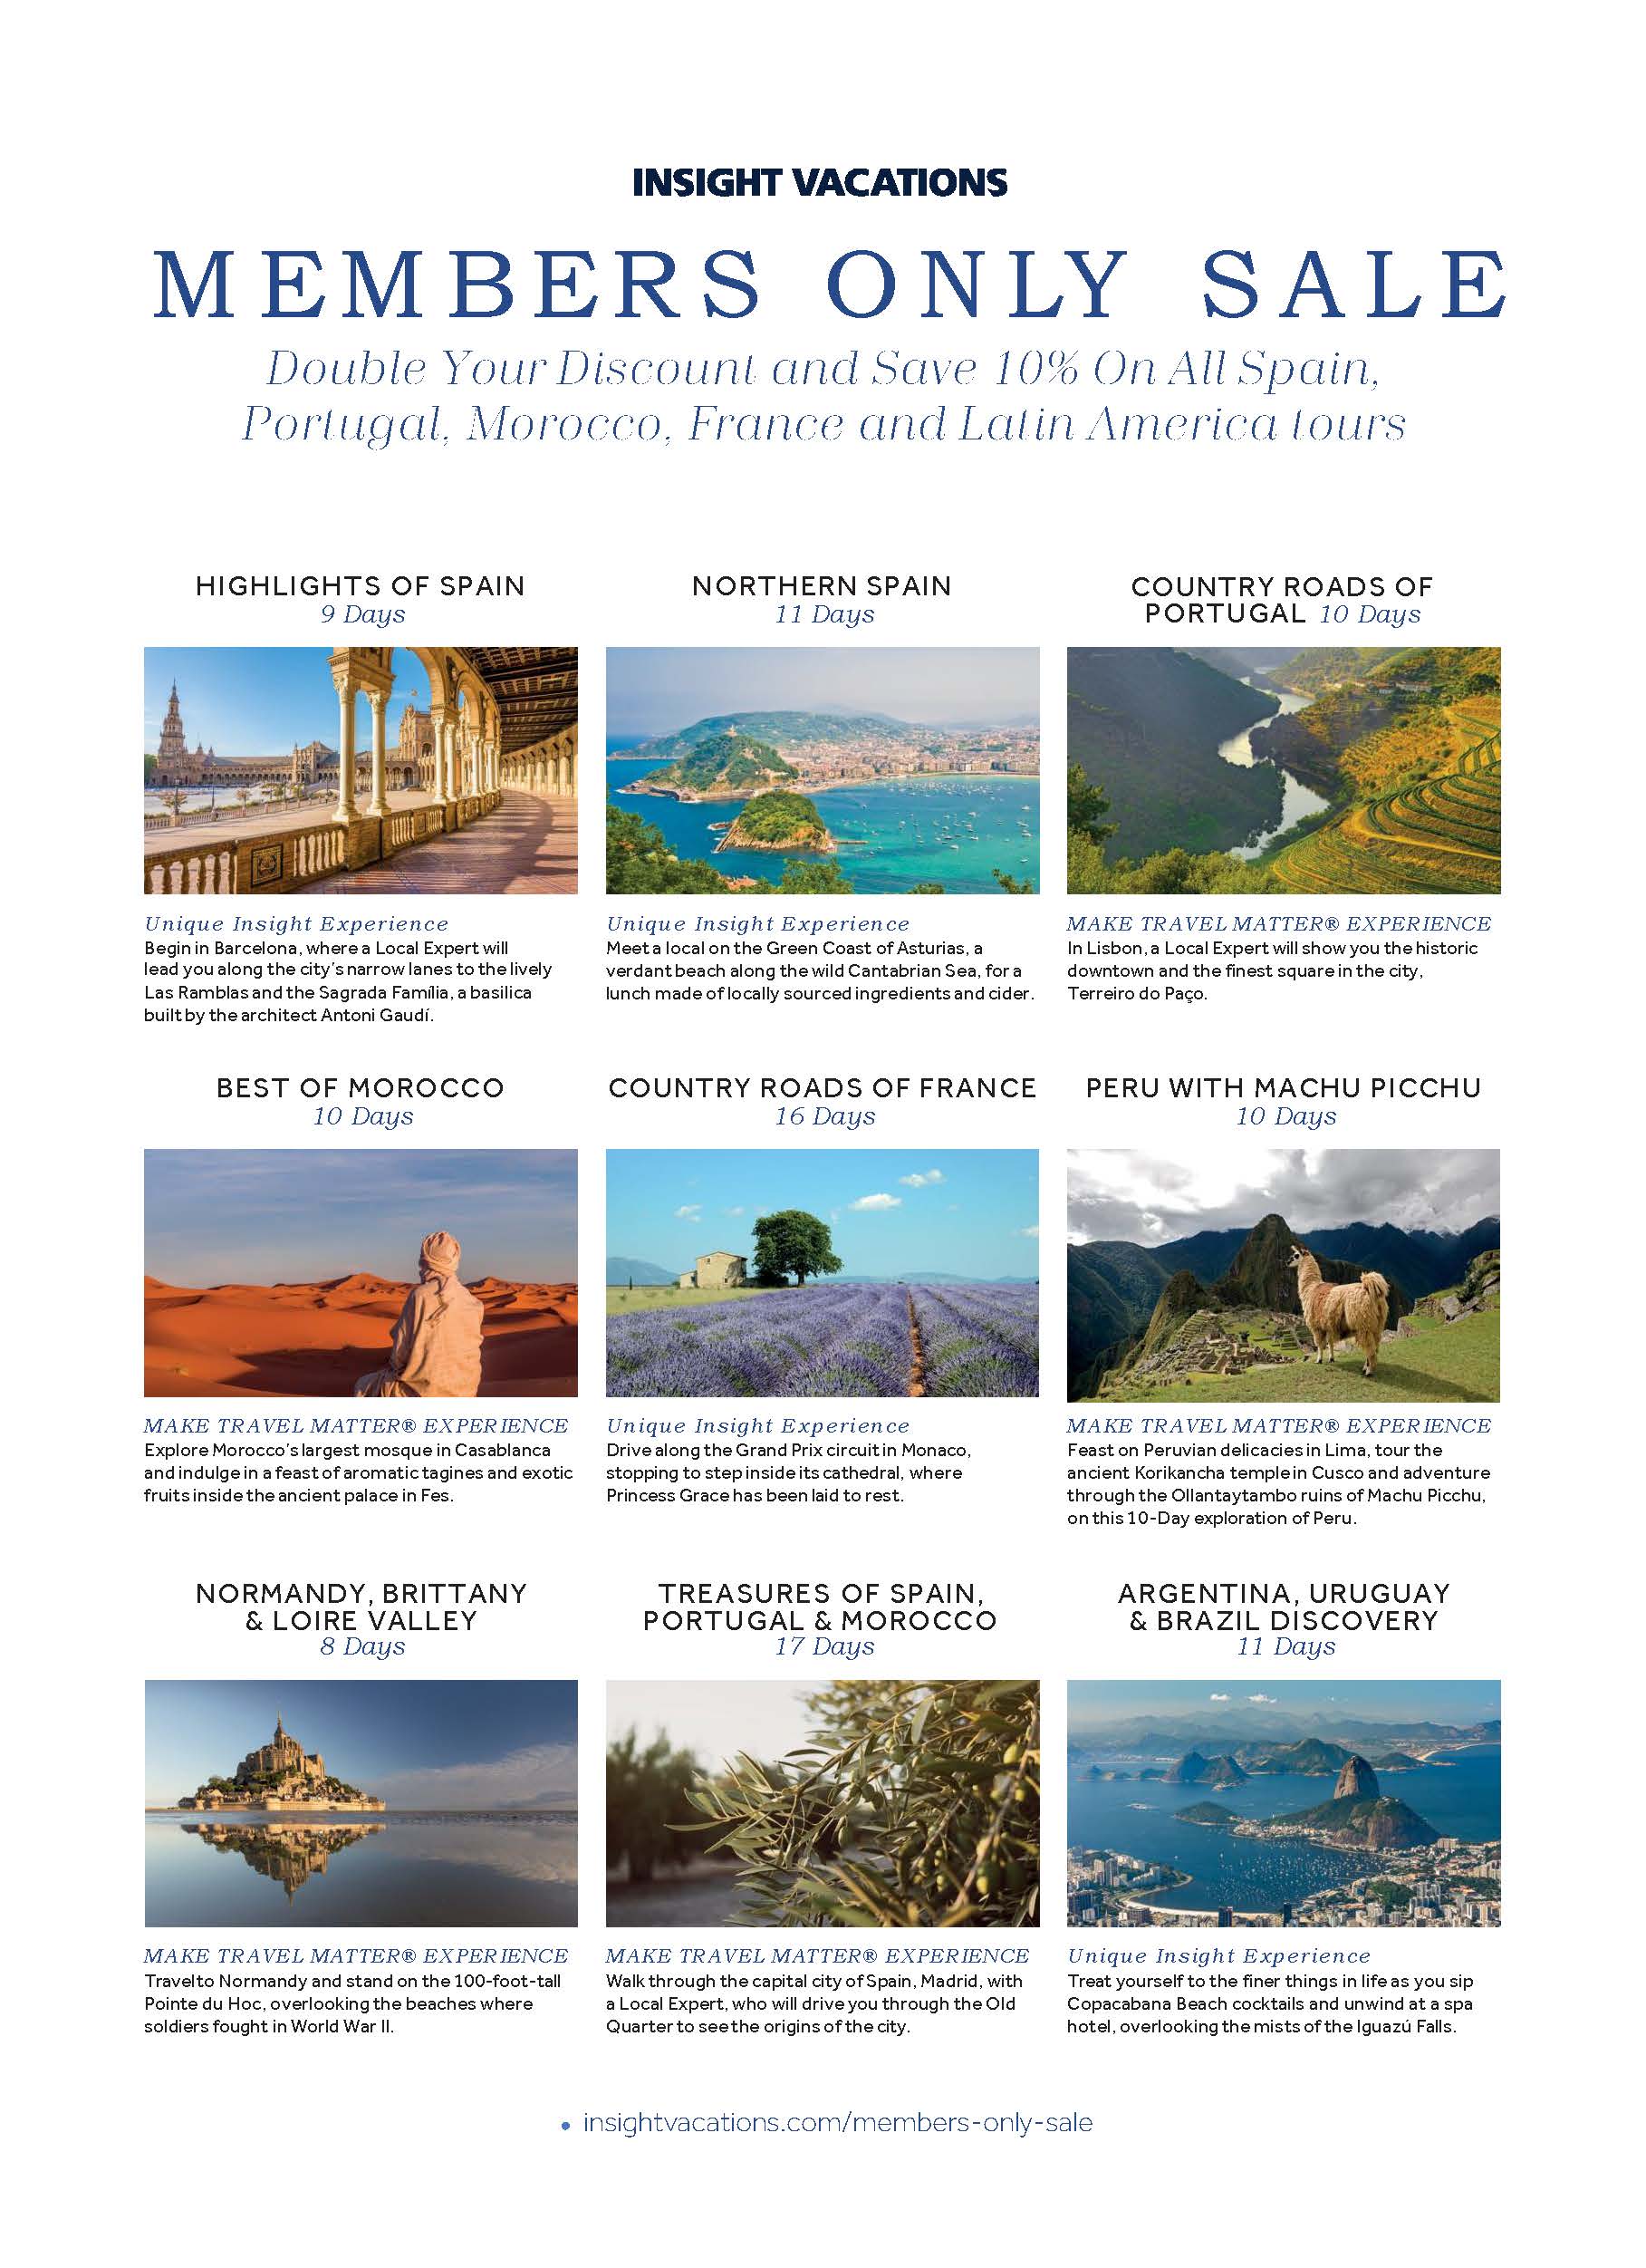 Insight Vacations Members Only Sale INSIGHTS VACATION MEMBERS ONLY SALE Page 2